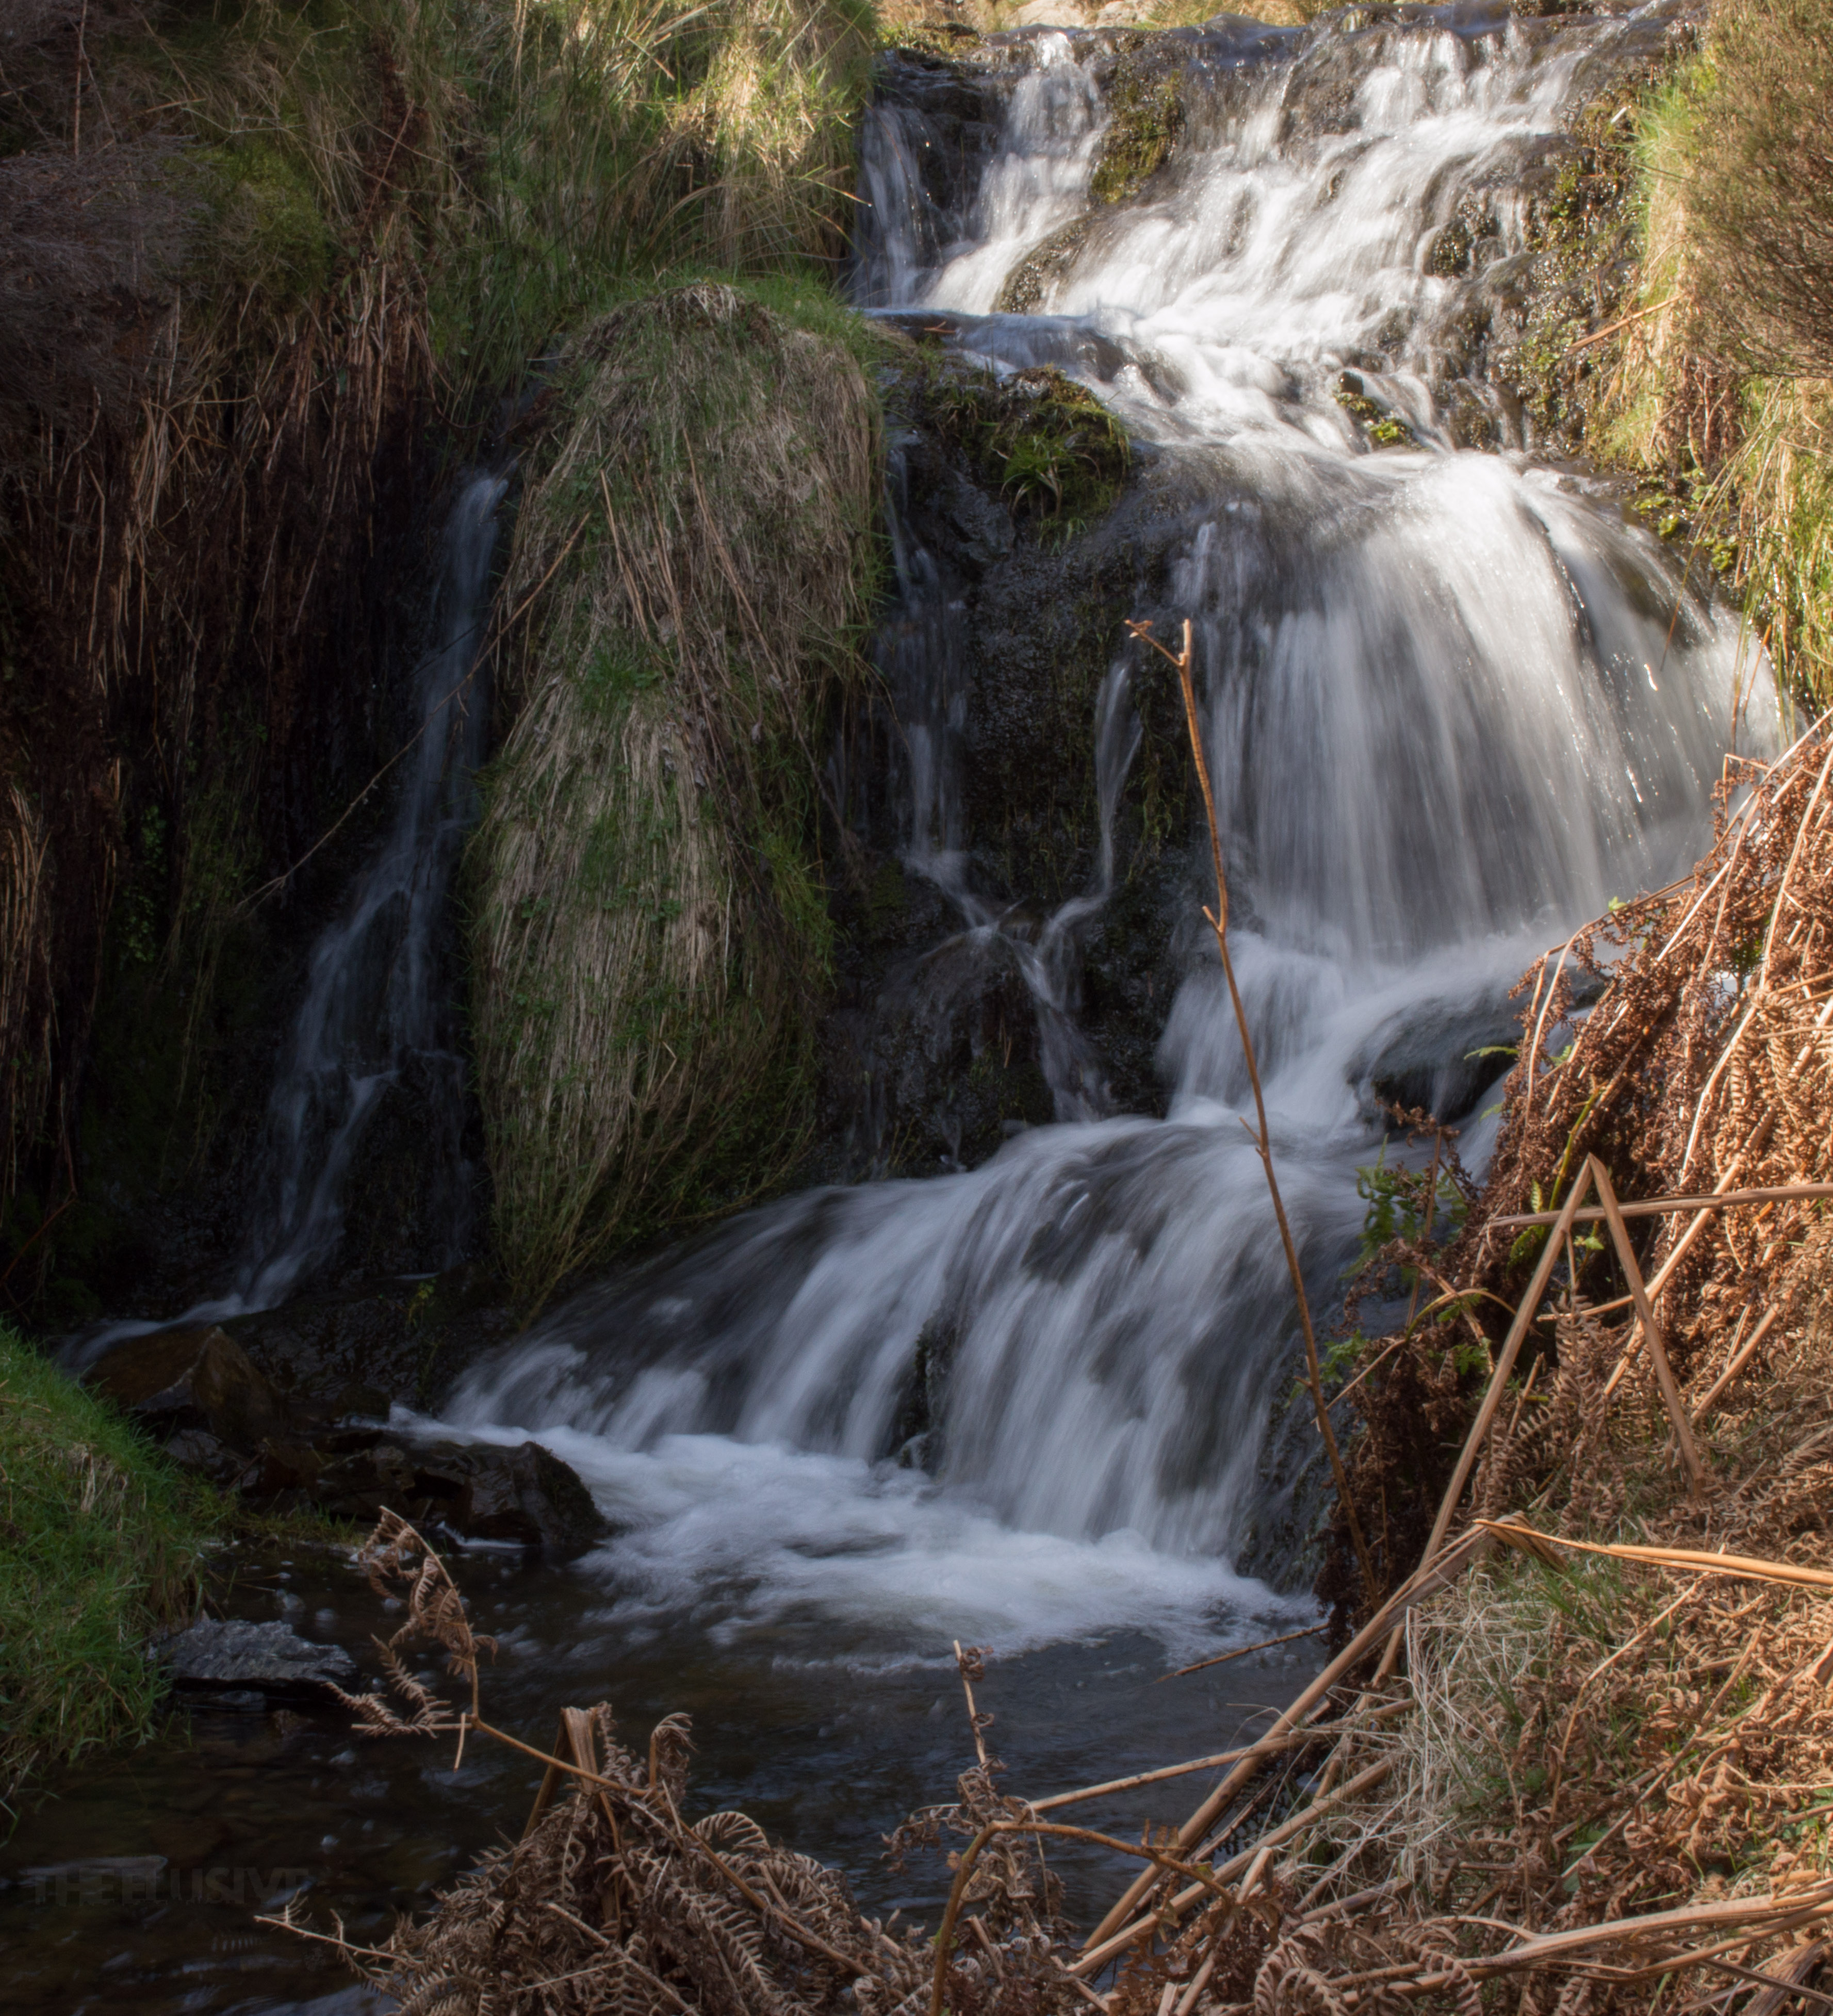 cardingmill valley waterfall (97 of 218)